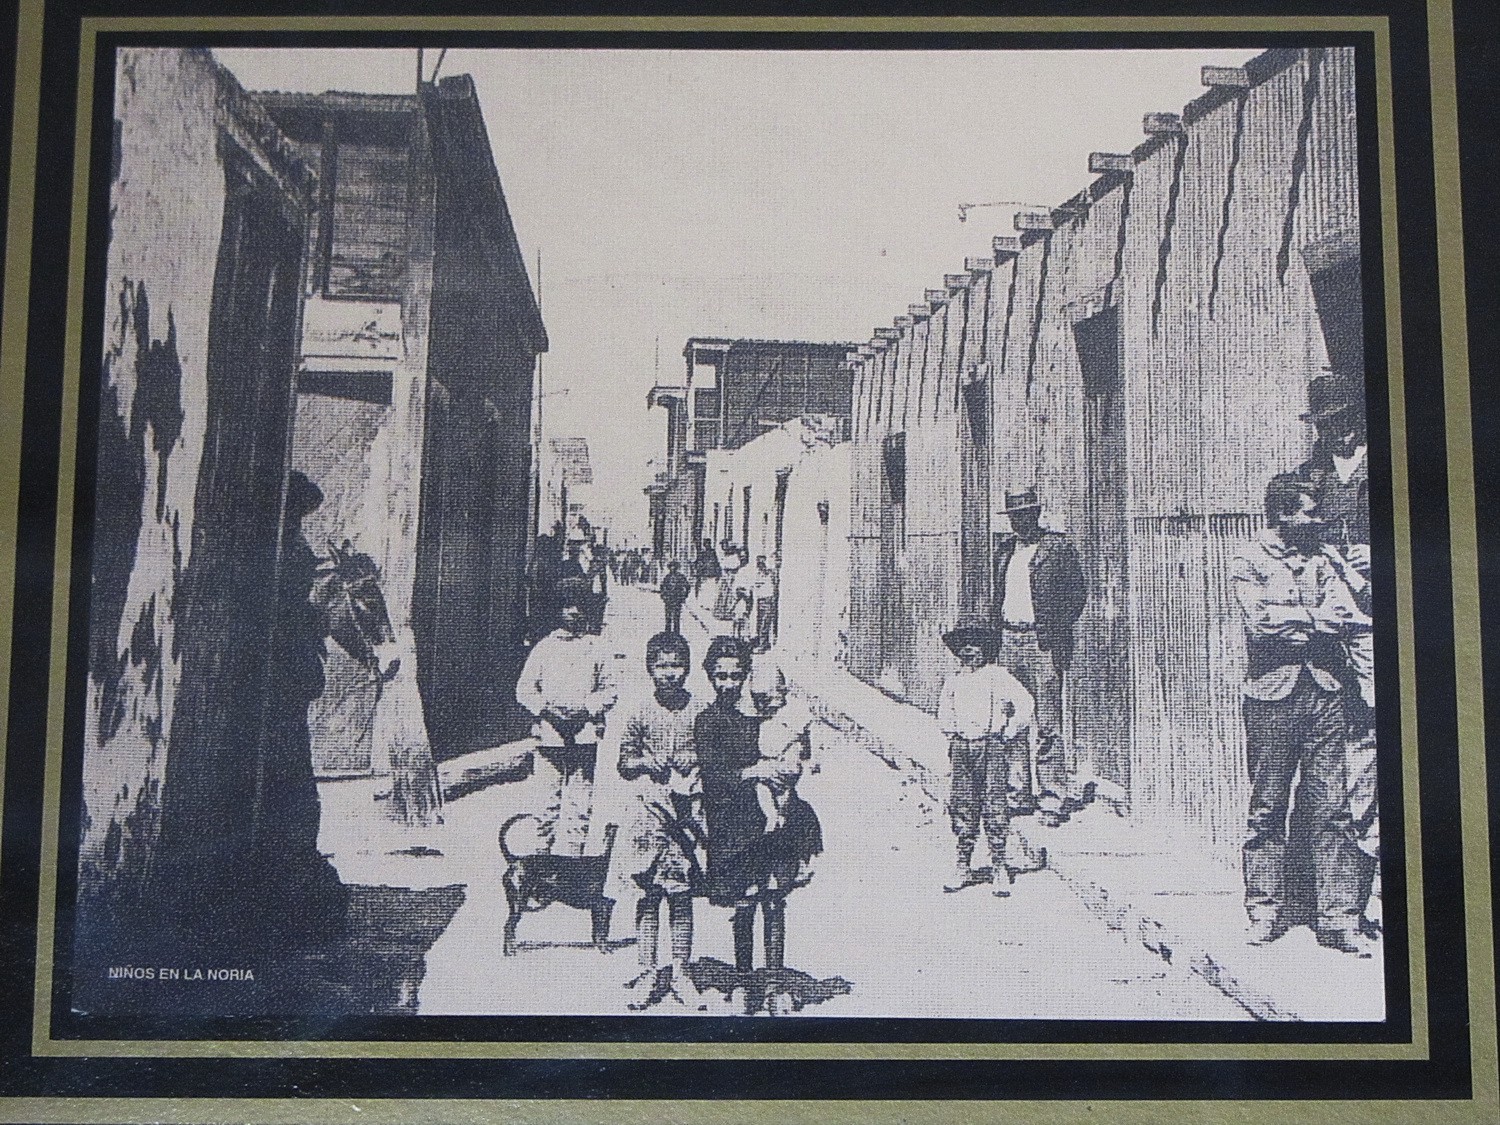 Picture of an nitrate town in the museum of Santa Laura